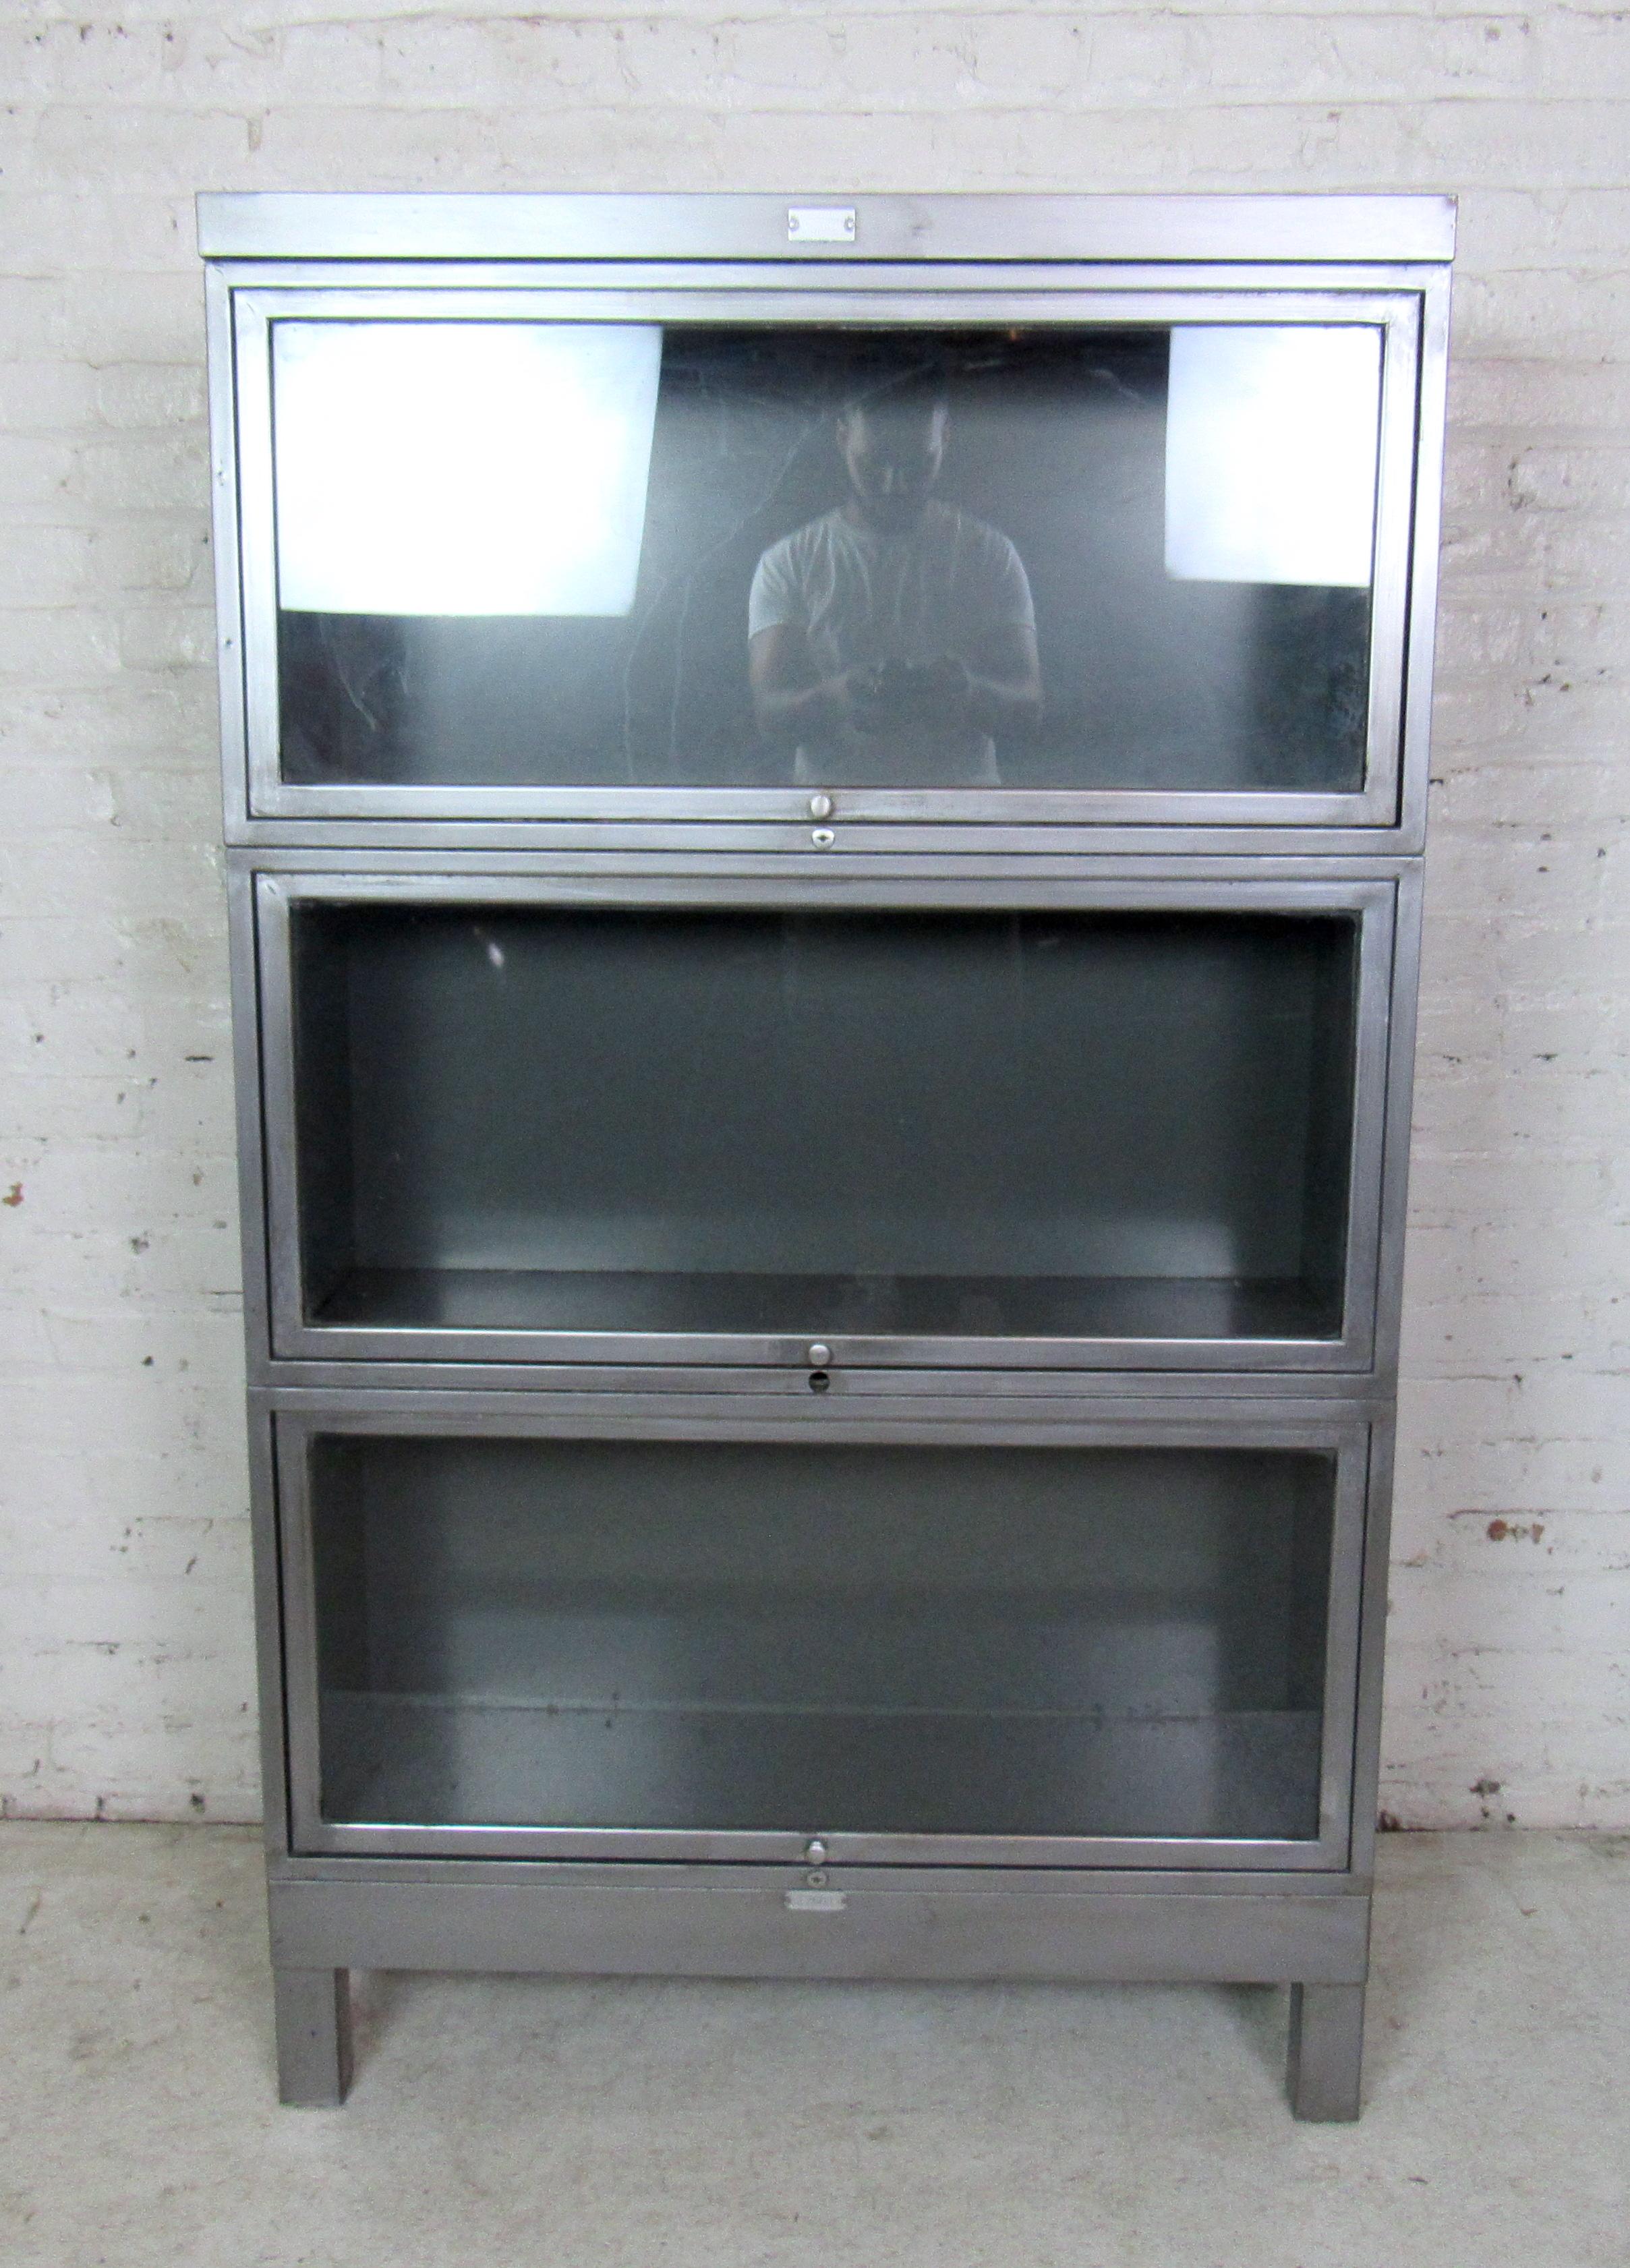 Vintage metal barrister bookcase, stacks three-high, glass window on each unit with polished brass handles, refinished with a bare metal style.

(Please confirm item location - NY or NJ - with dealer).